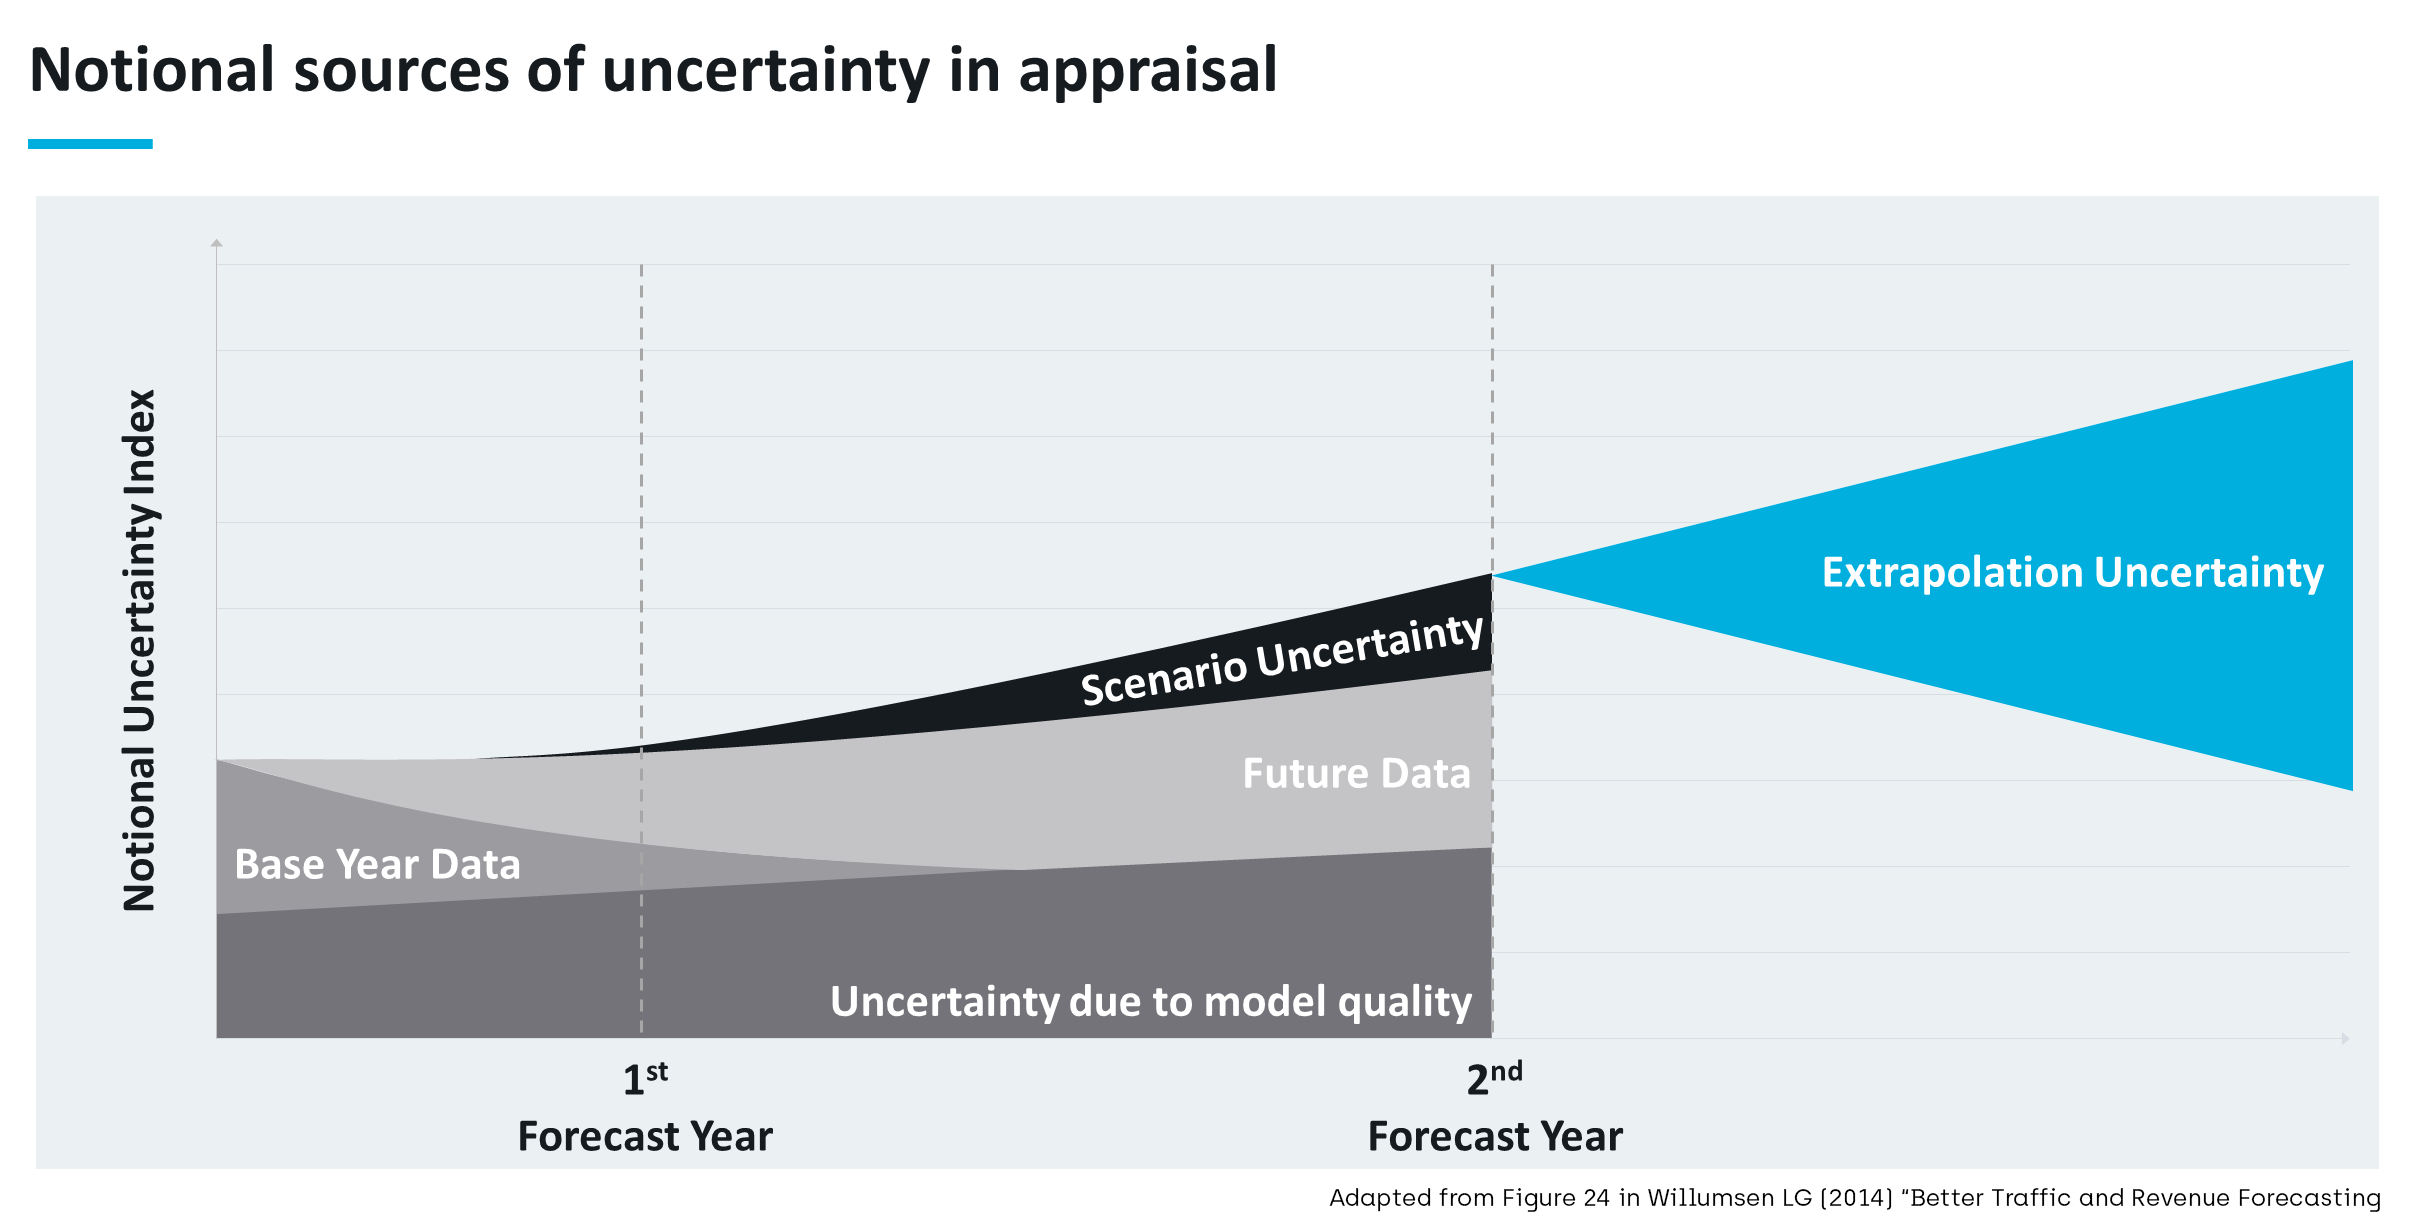 Notional sources of uncertainty in appraisal